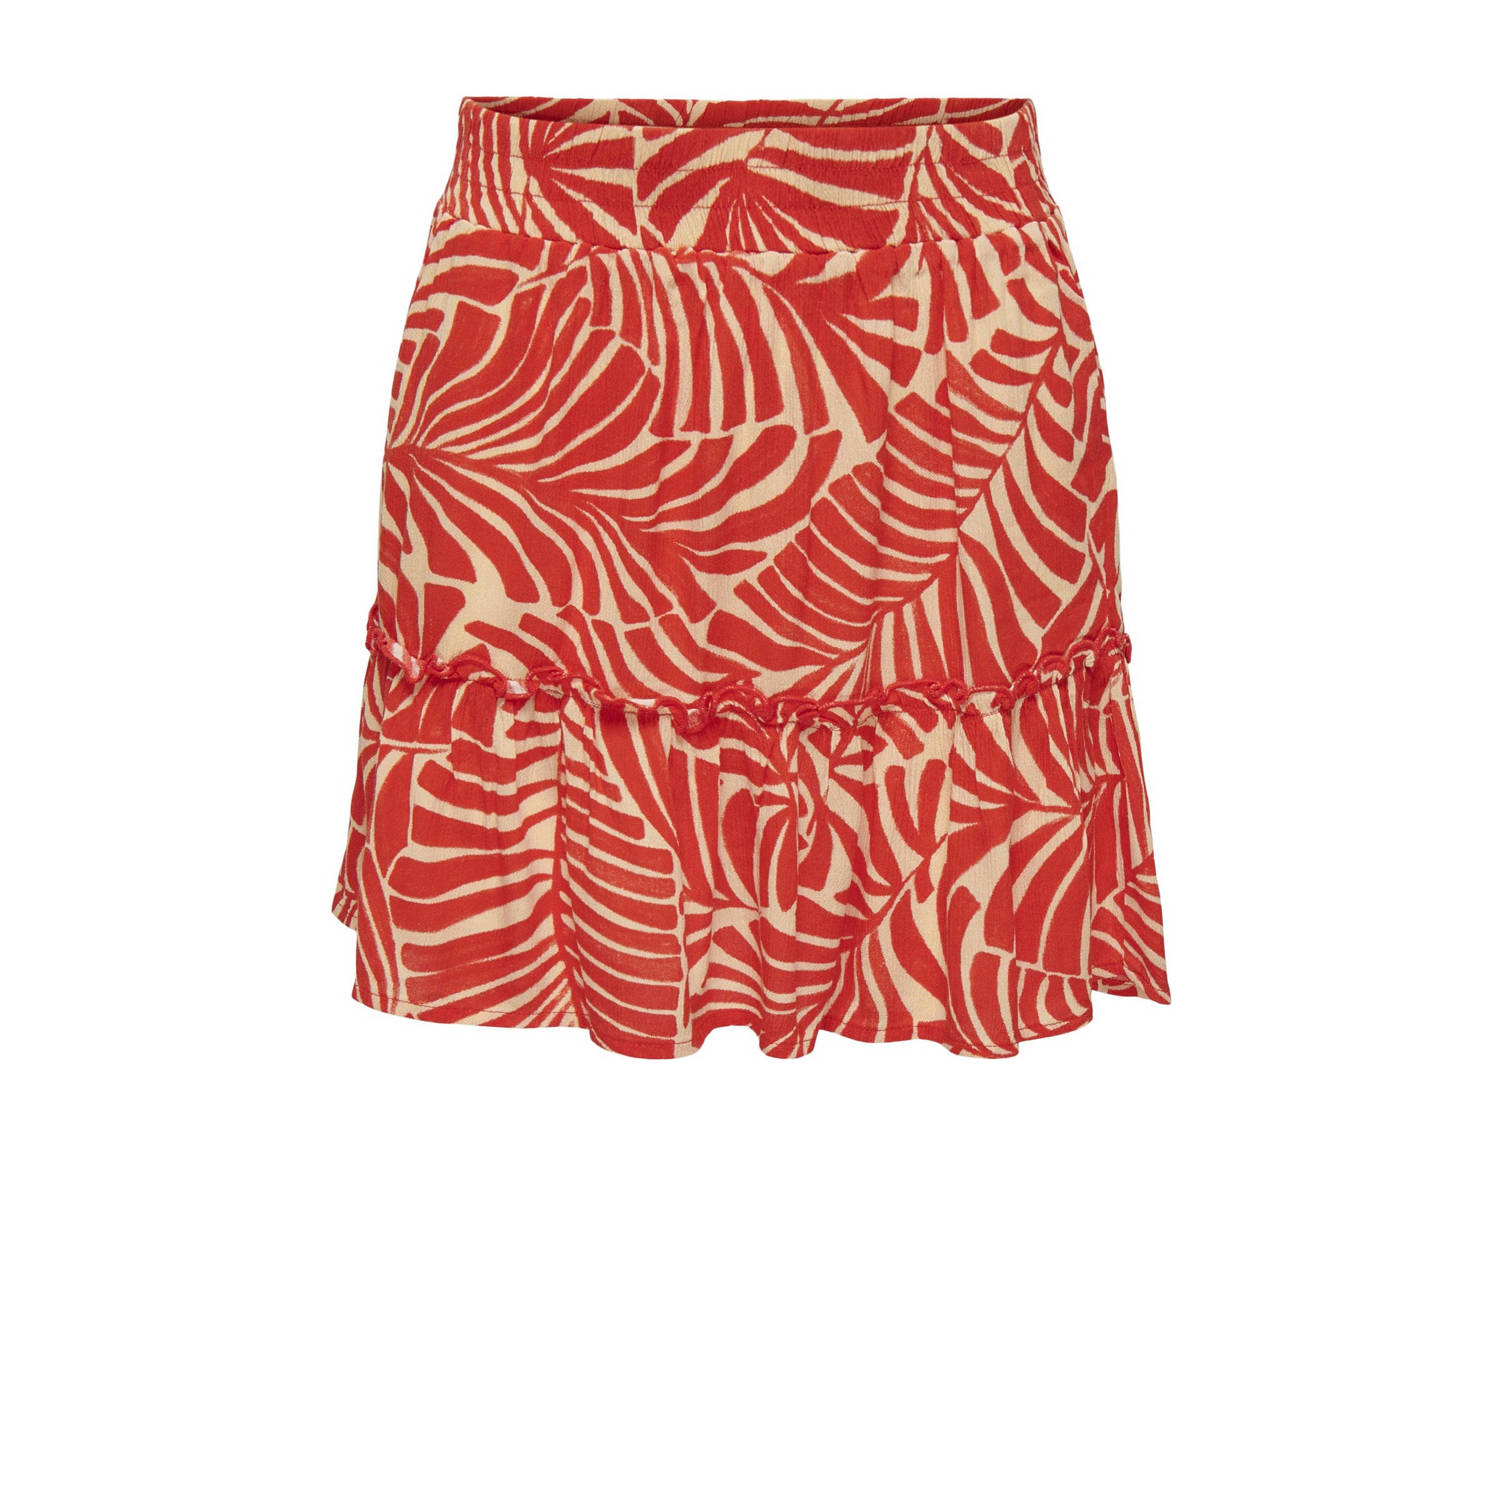 ONLY rok met all over print rood oranje